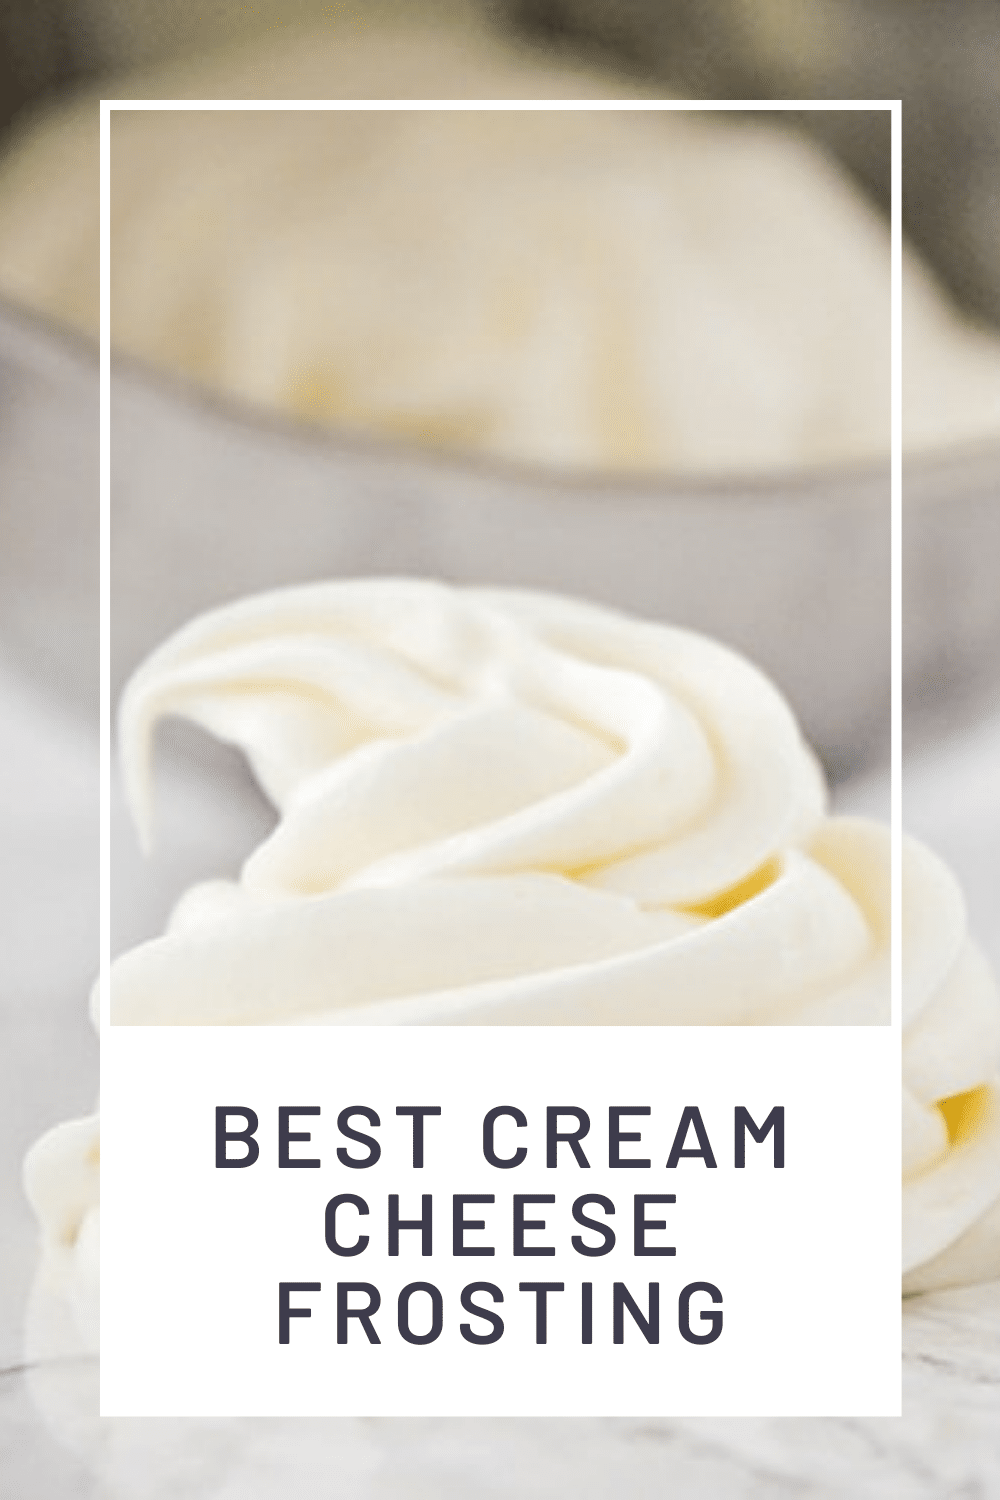 This simple, 6-ingredient cream cheese frosting is easy to make and pipe onto your favorite baked goods. You’ll never want (or need!) another frosting recipe. via @somewhatsimple